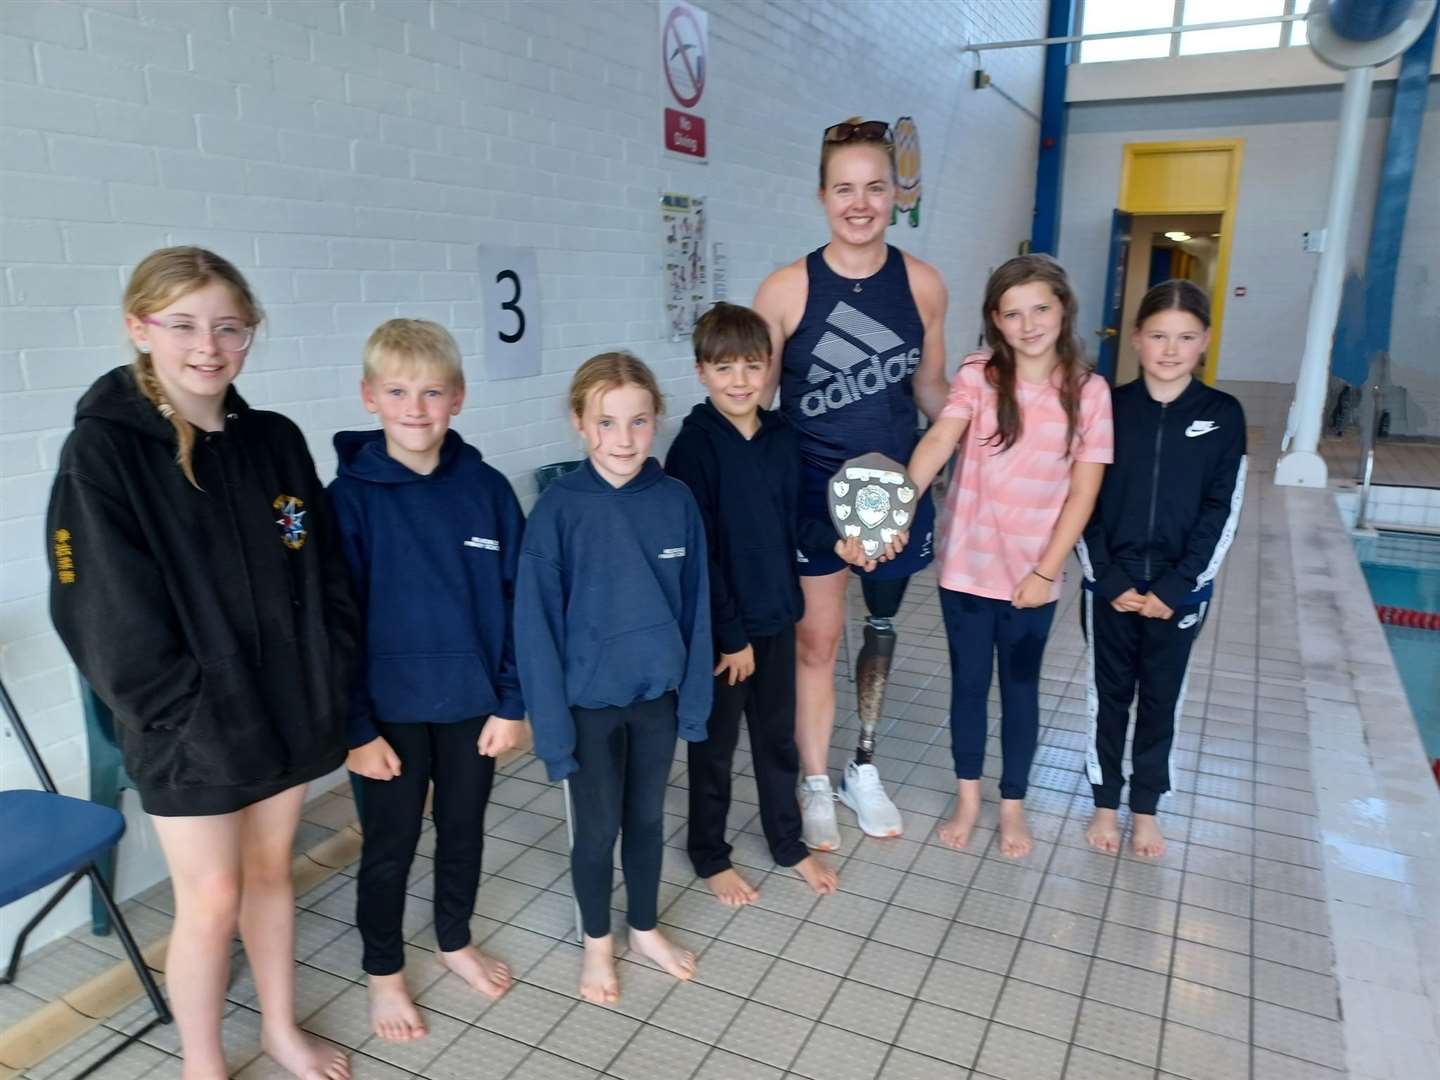 Para-athlete Hope Gordon with Helmsdale primary swimmers who won the Small Schools trophy, which has been held by Rogart since 2013. From left, Lorna Hope, Jayden Taylor, Amelia Gordon, Sholto Shaw, Olivia MacKay and Eva Murray.